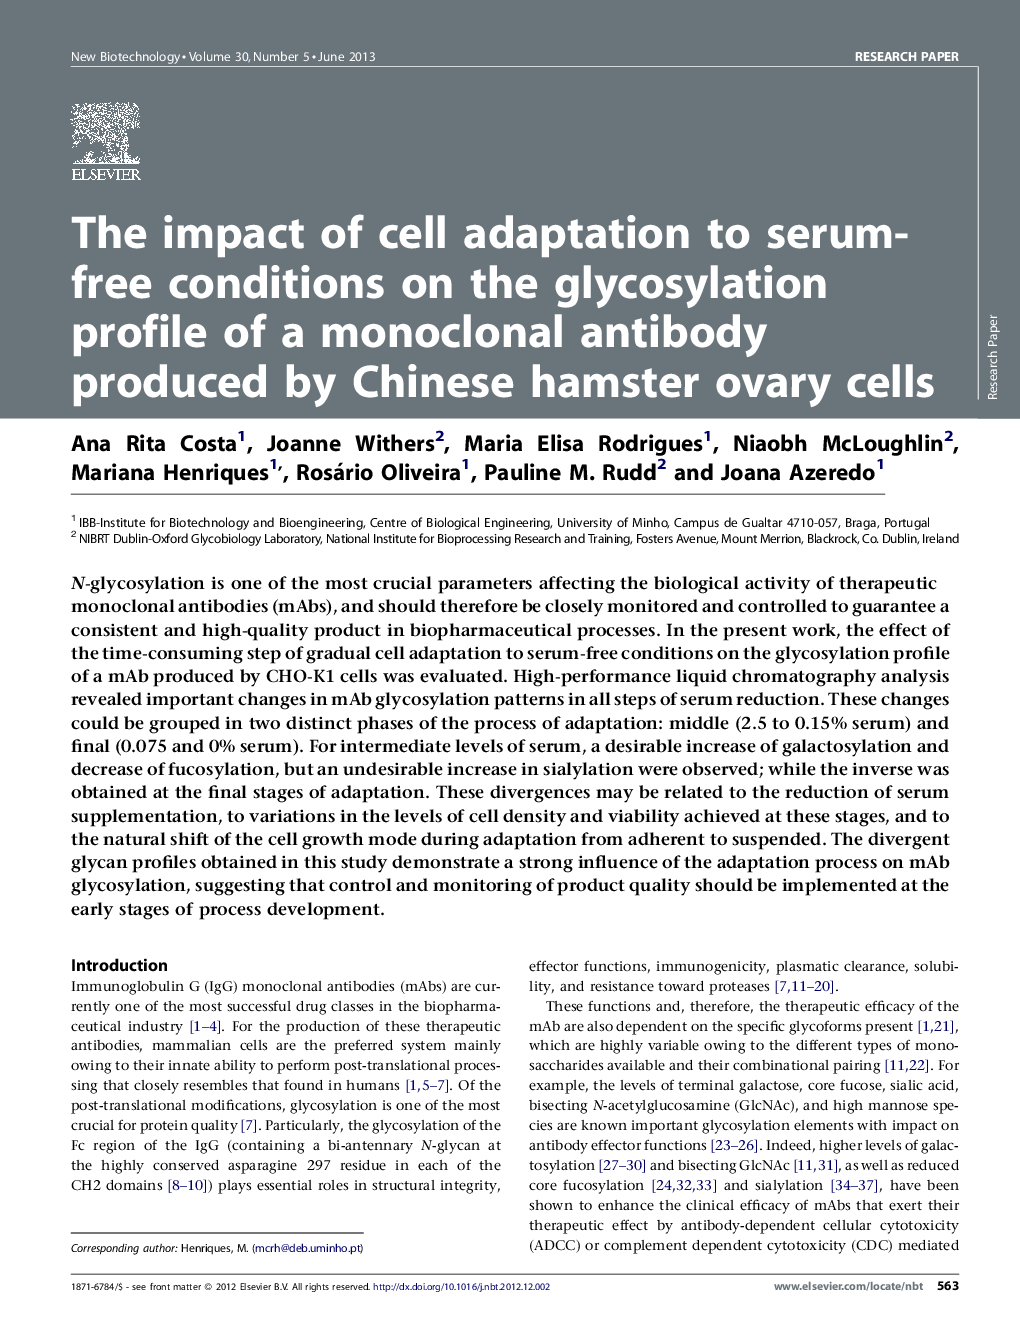 The impact of cell adaptation to serum-free conditions on the glycosylation profile of a monoclonal antibody produced by Chinese hamster ovary cells